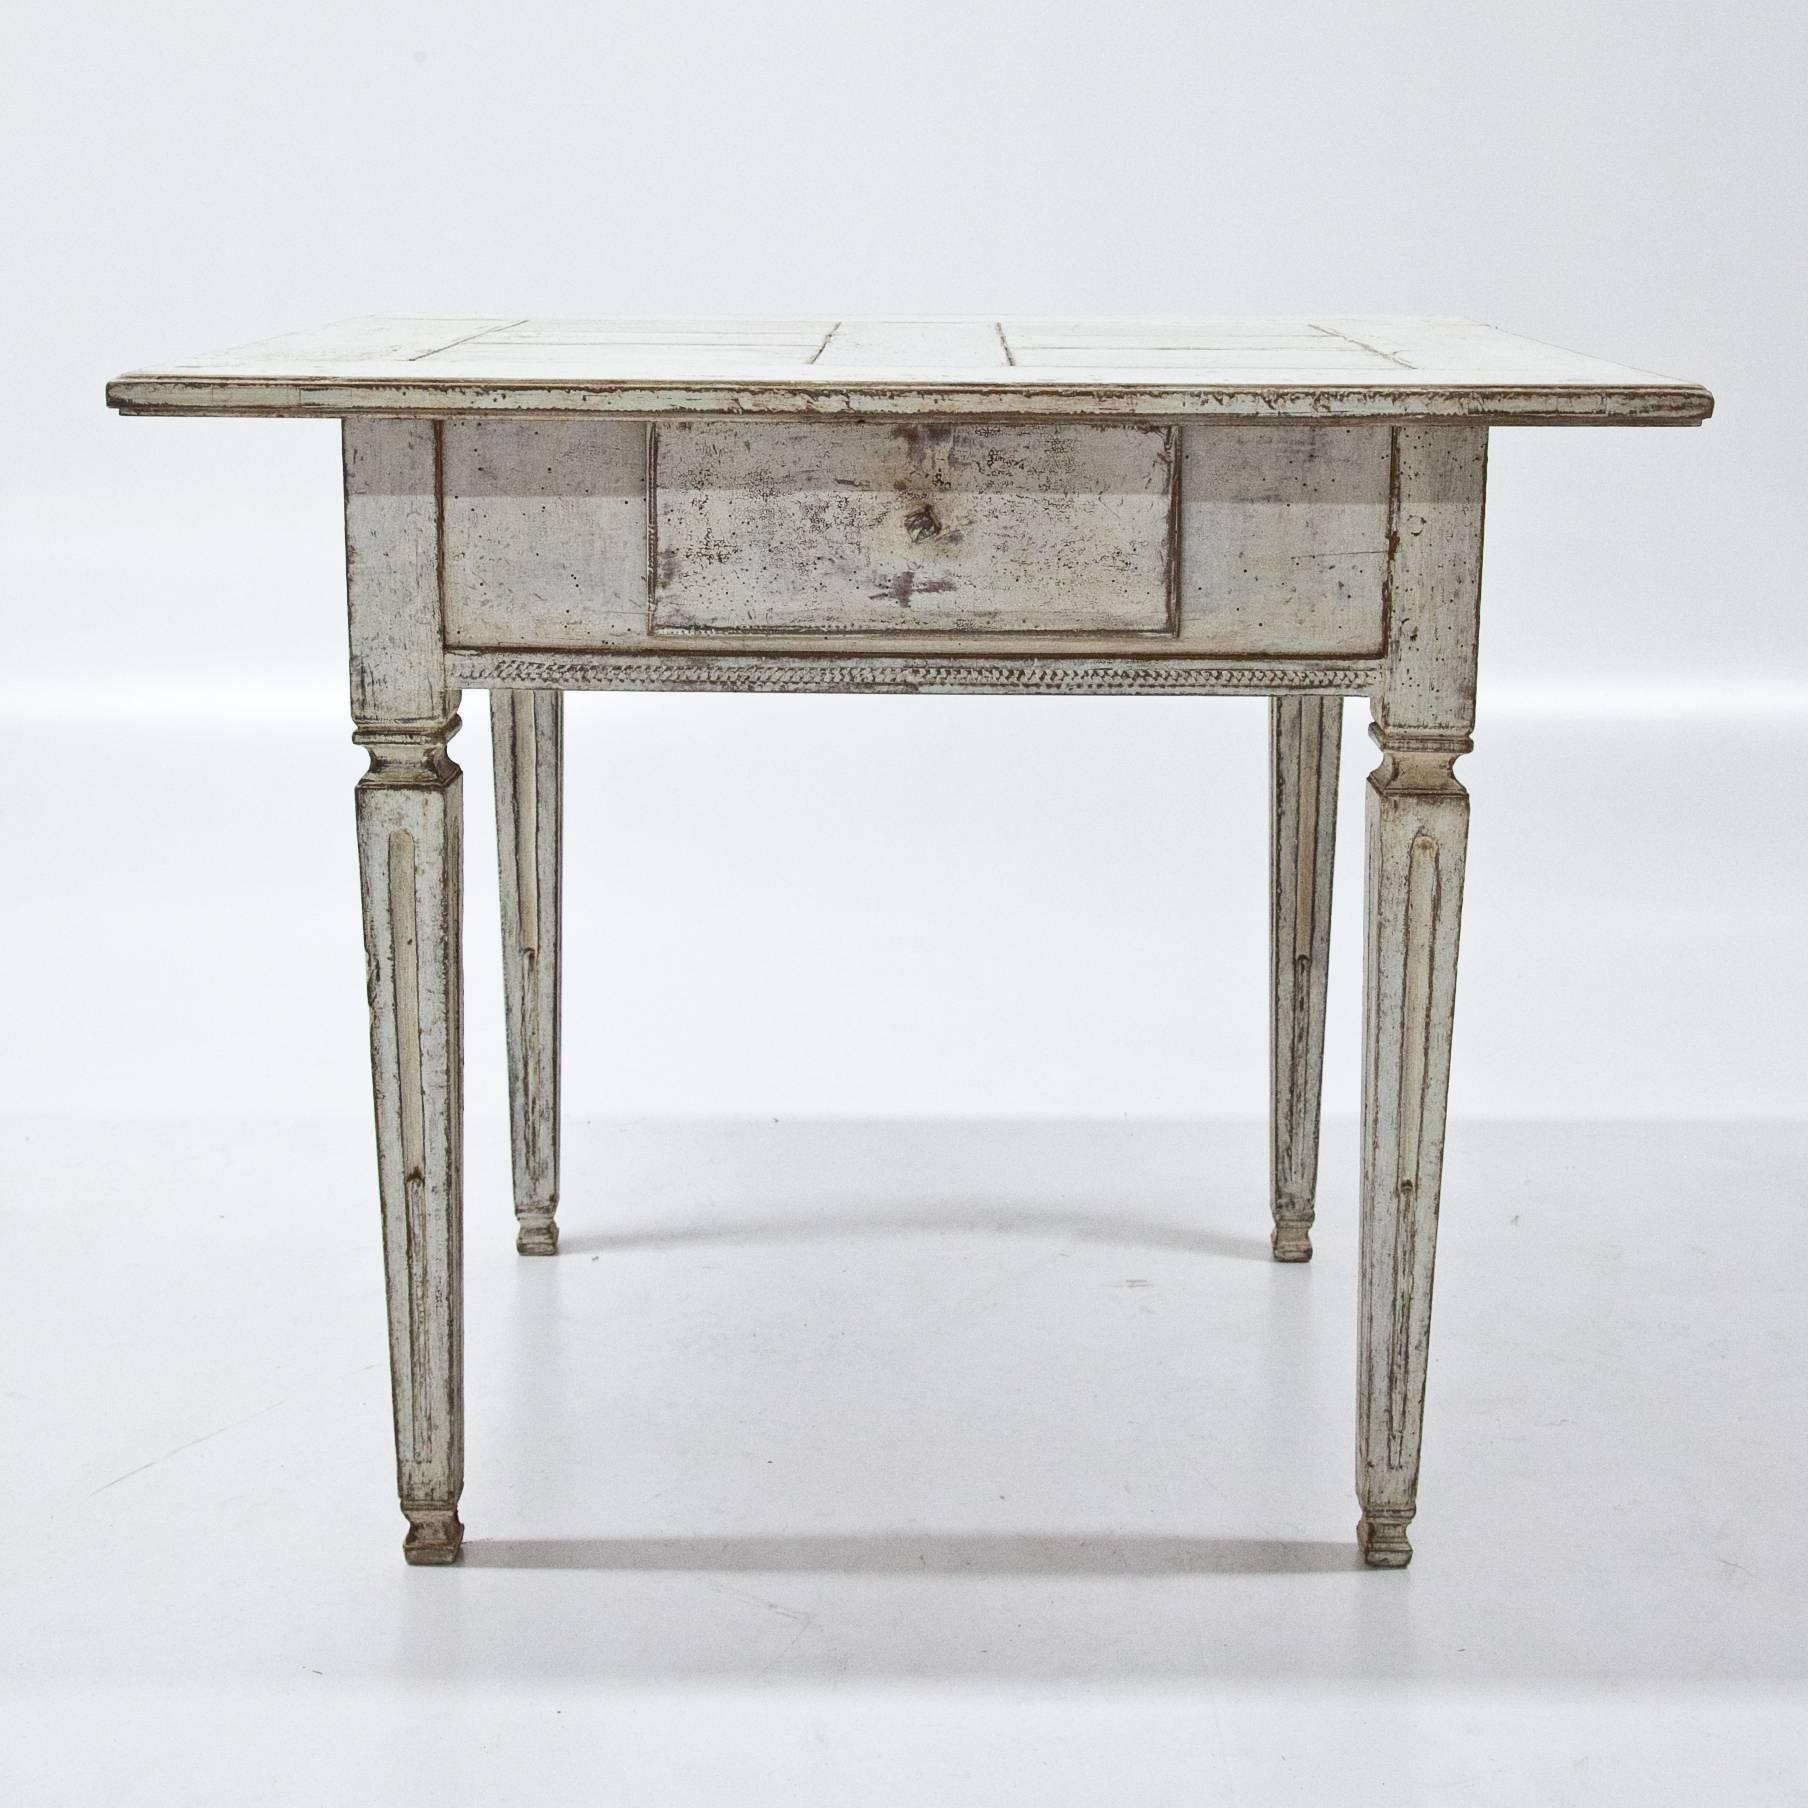 Gustavian Provencal Table, Late 18th Century